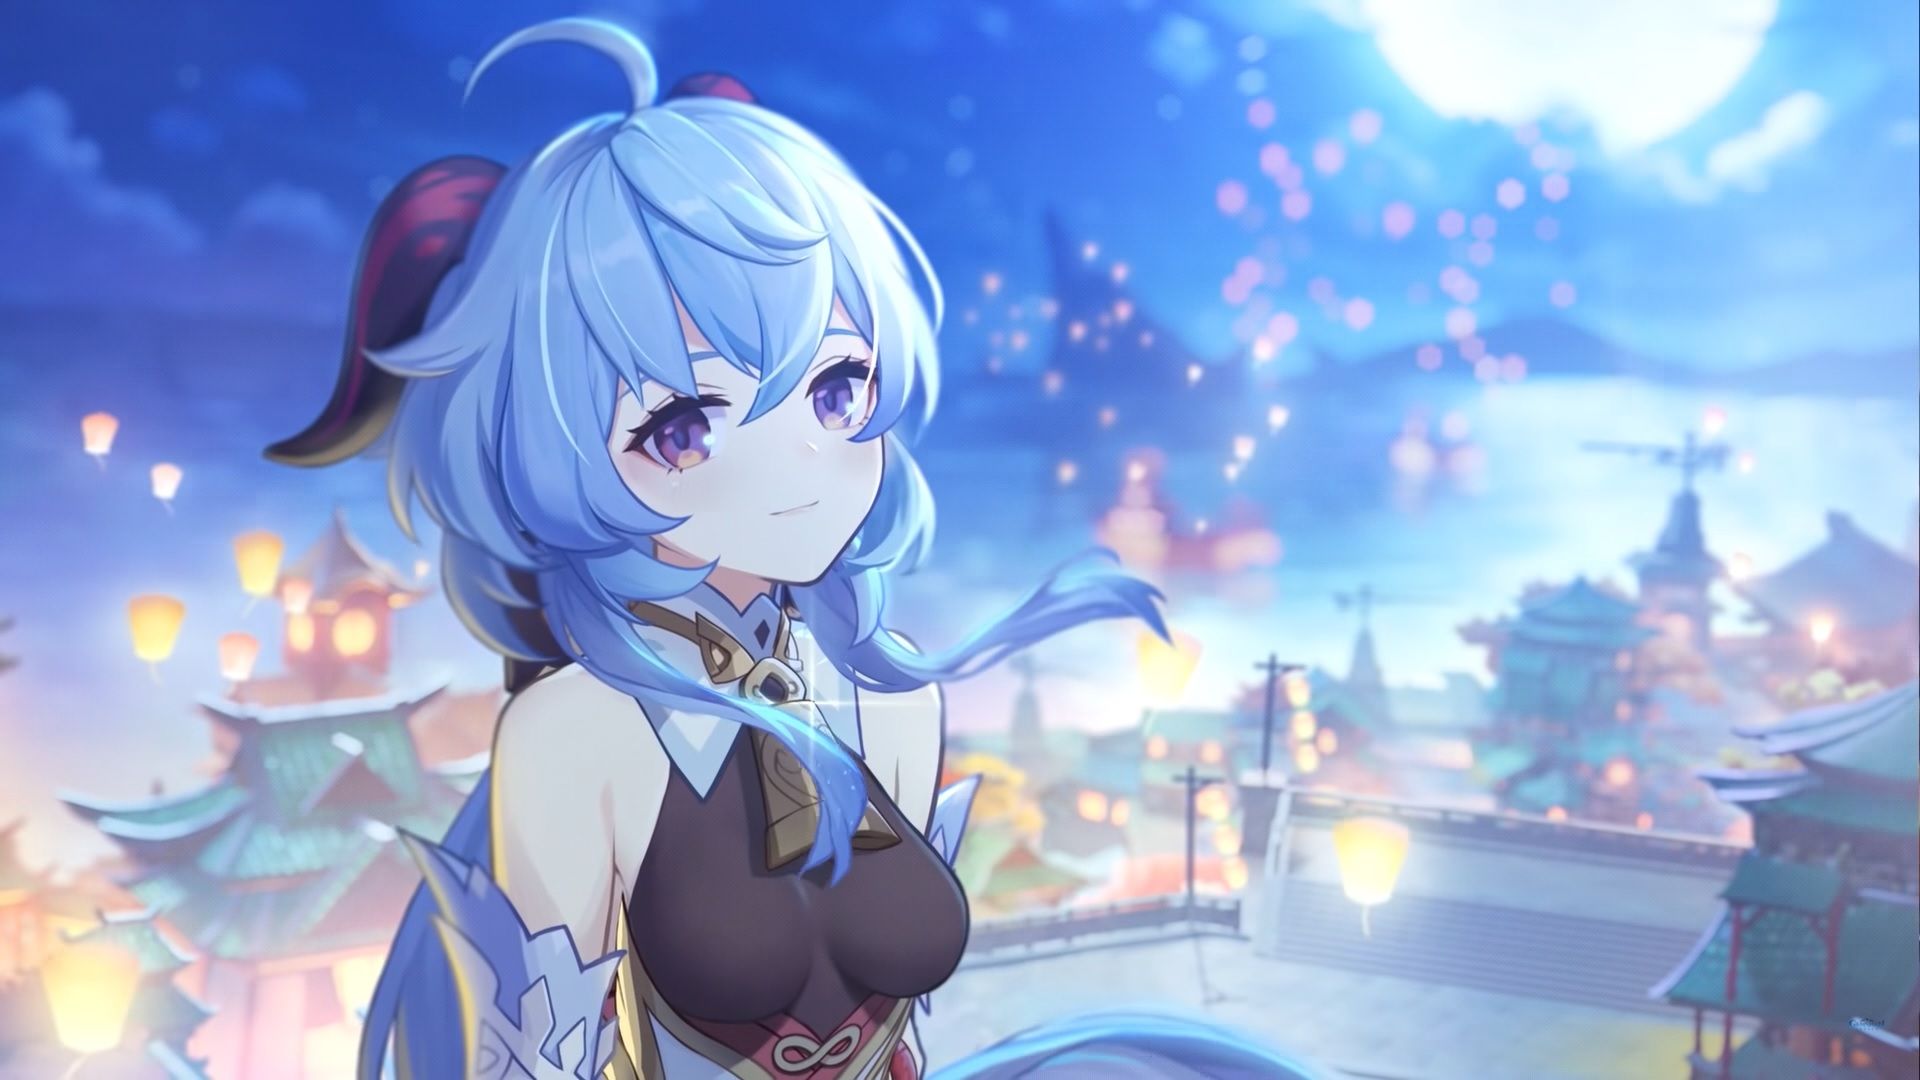 Genshin Impact's Ganyu Wants You to Walk With Her in a New Trailer